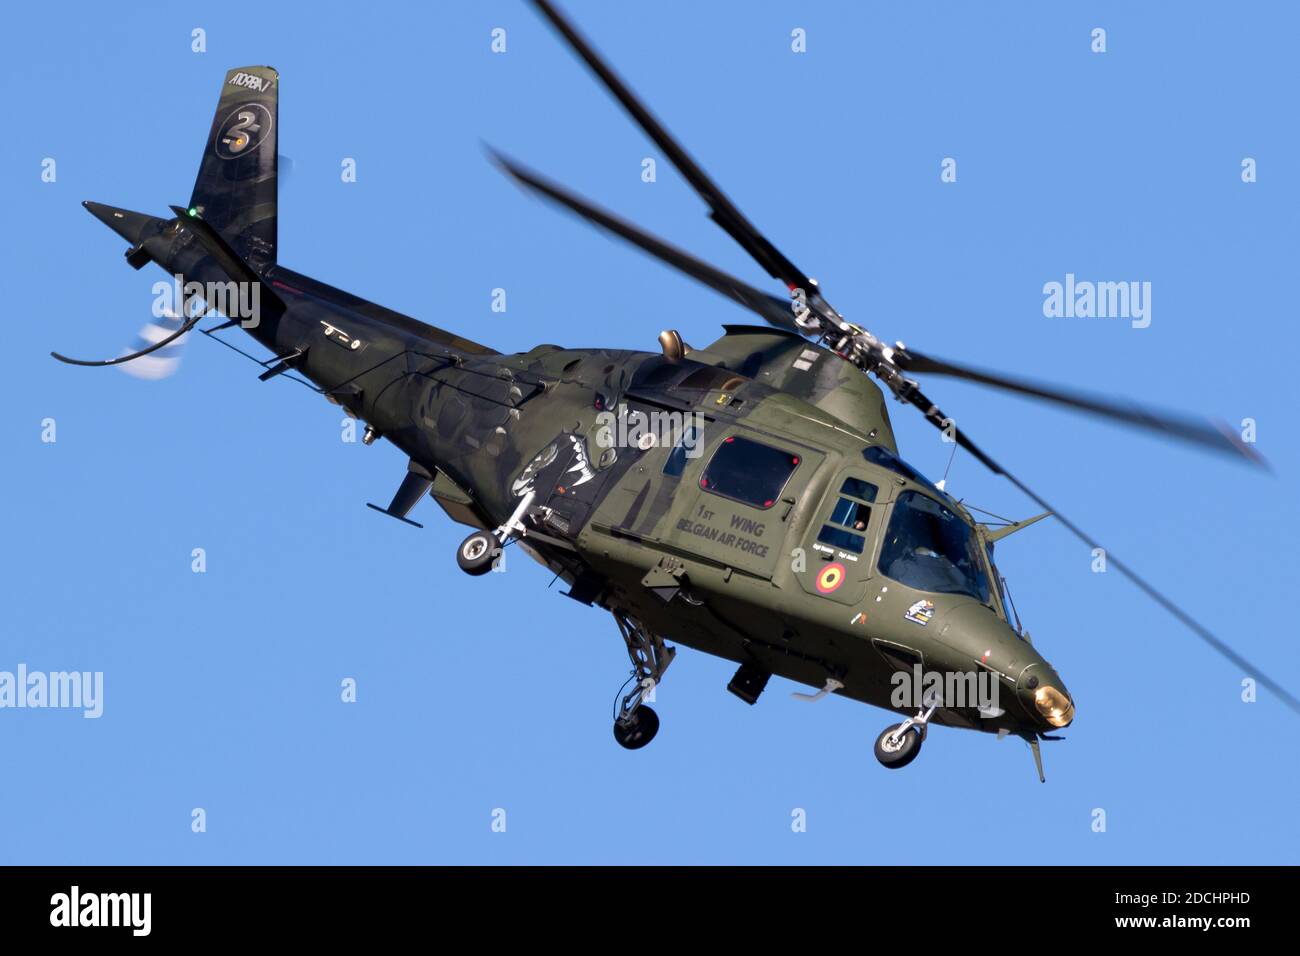 Belgian Air Force Agusta A109 helicopter in flight. Belgium - September 14, 2019 Stock Photo